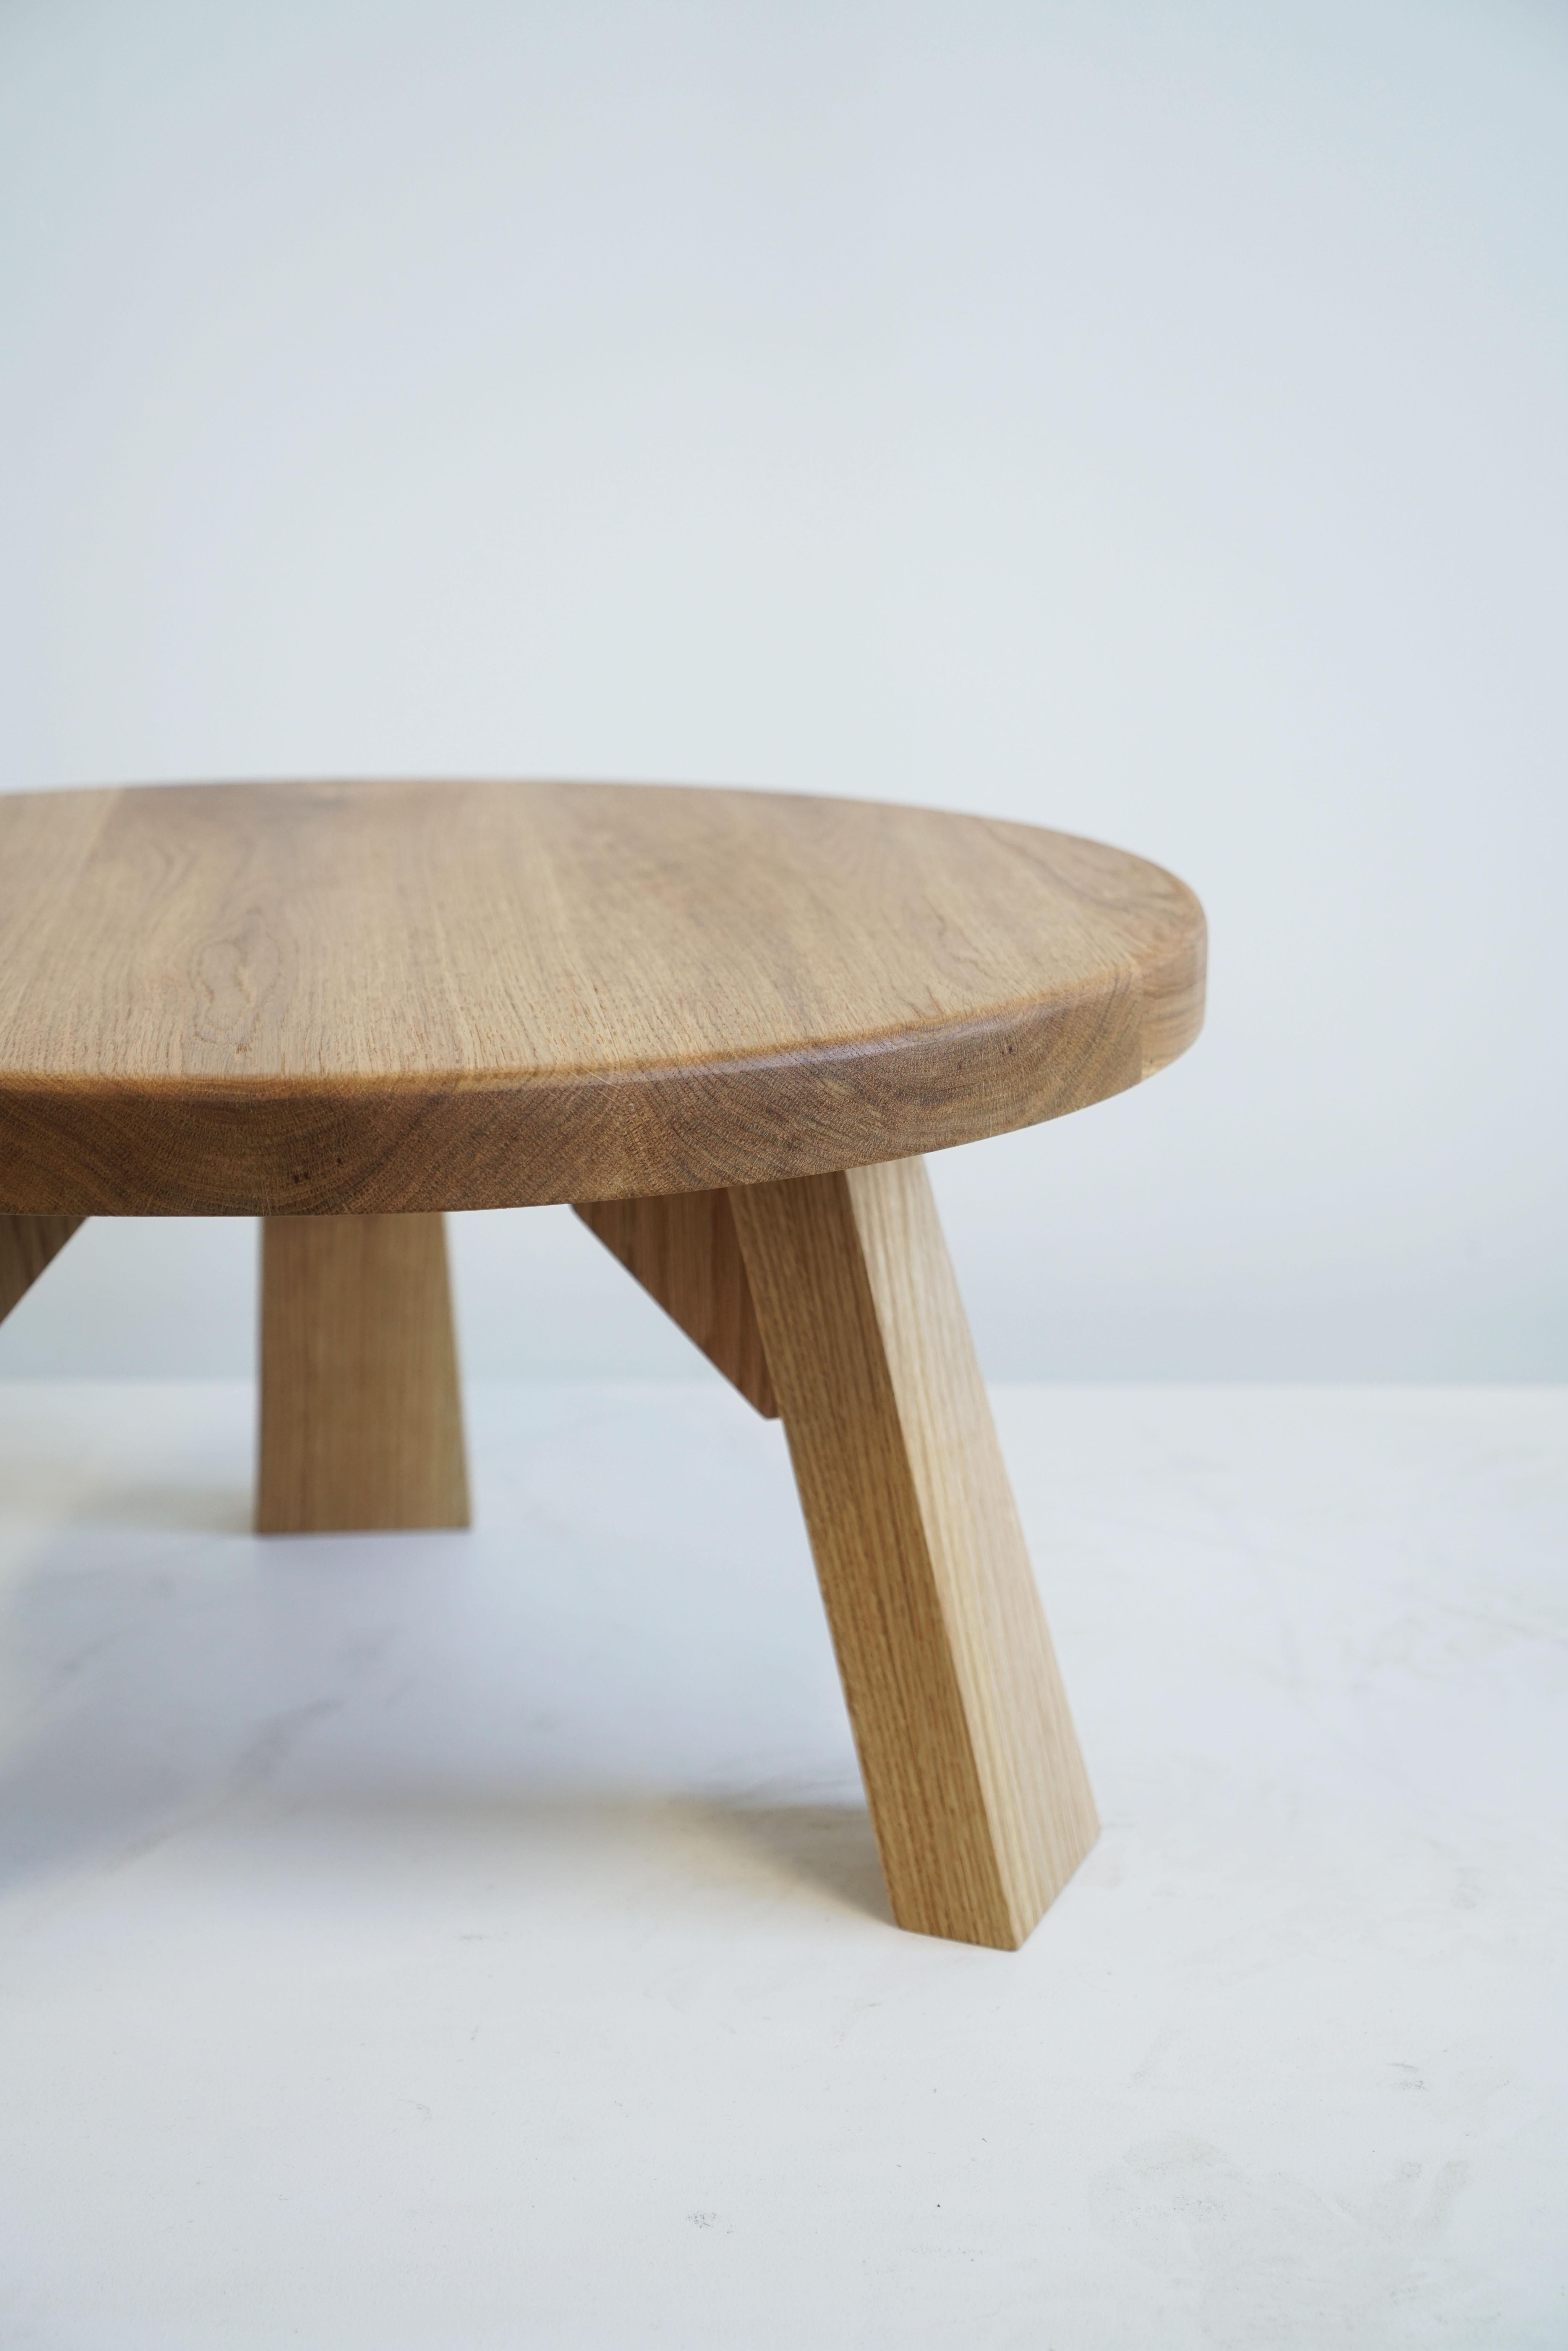 Organic Modern Solid White Oak Coffee Table by Last Workshop, Custom Sizes Made to Order For Sale